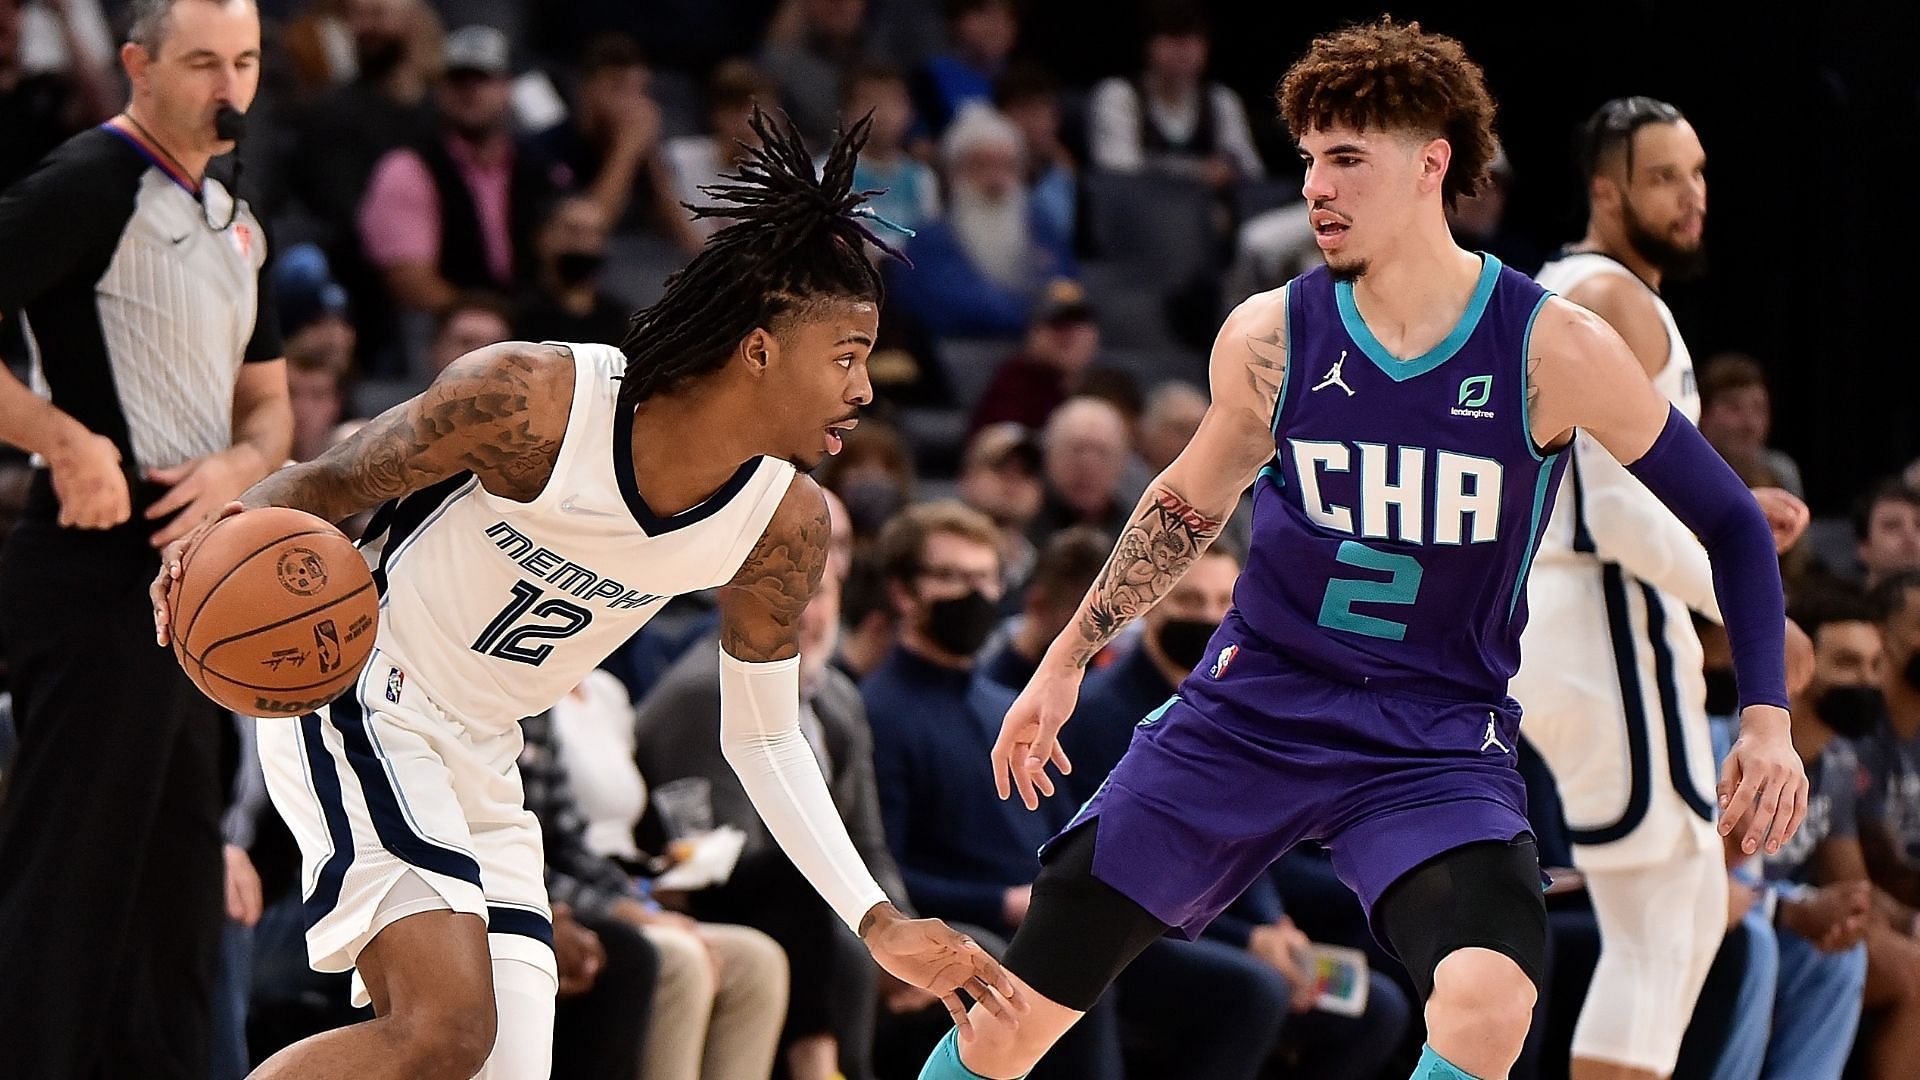 Two of the most electric point guards in the NBA will face off on Saturday as the Memphis Grizzlies visit the Charlotte Hornets. 